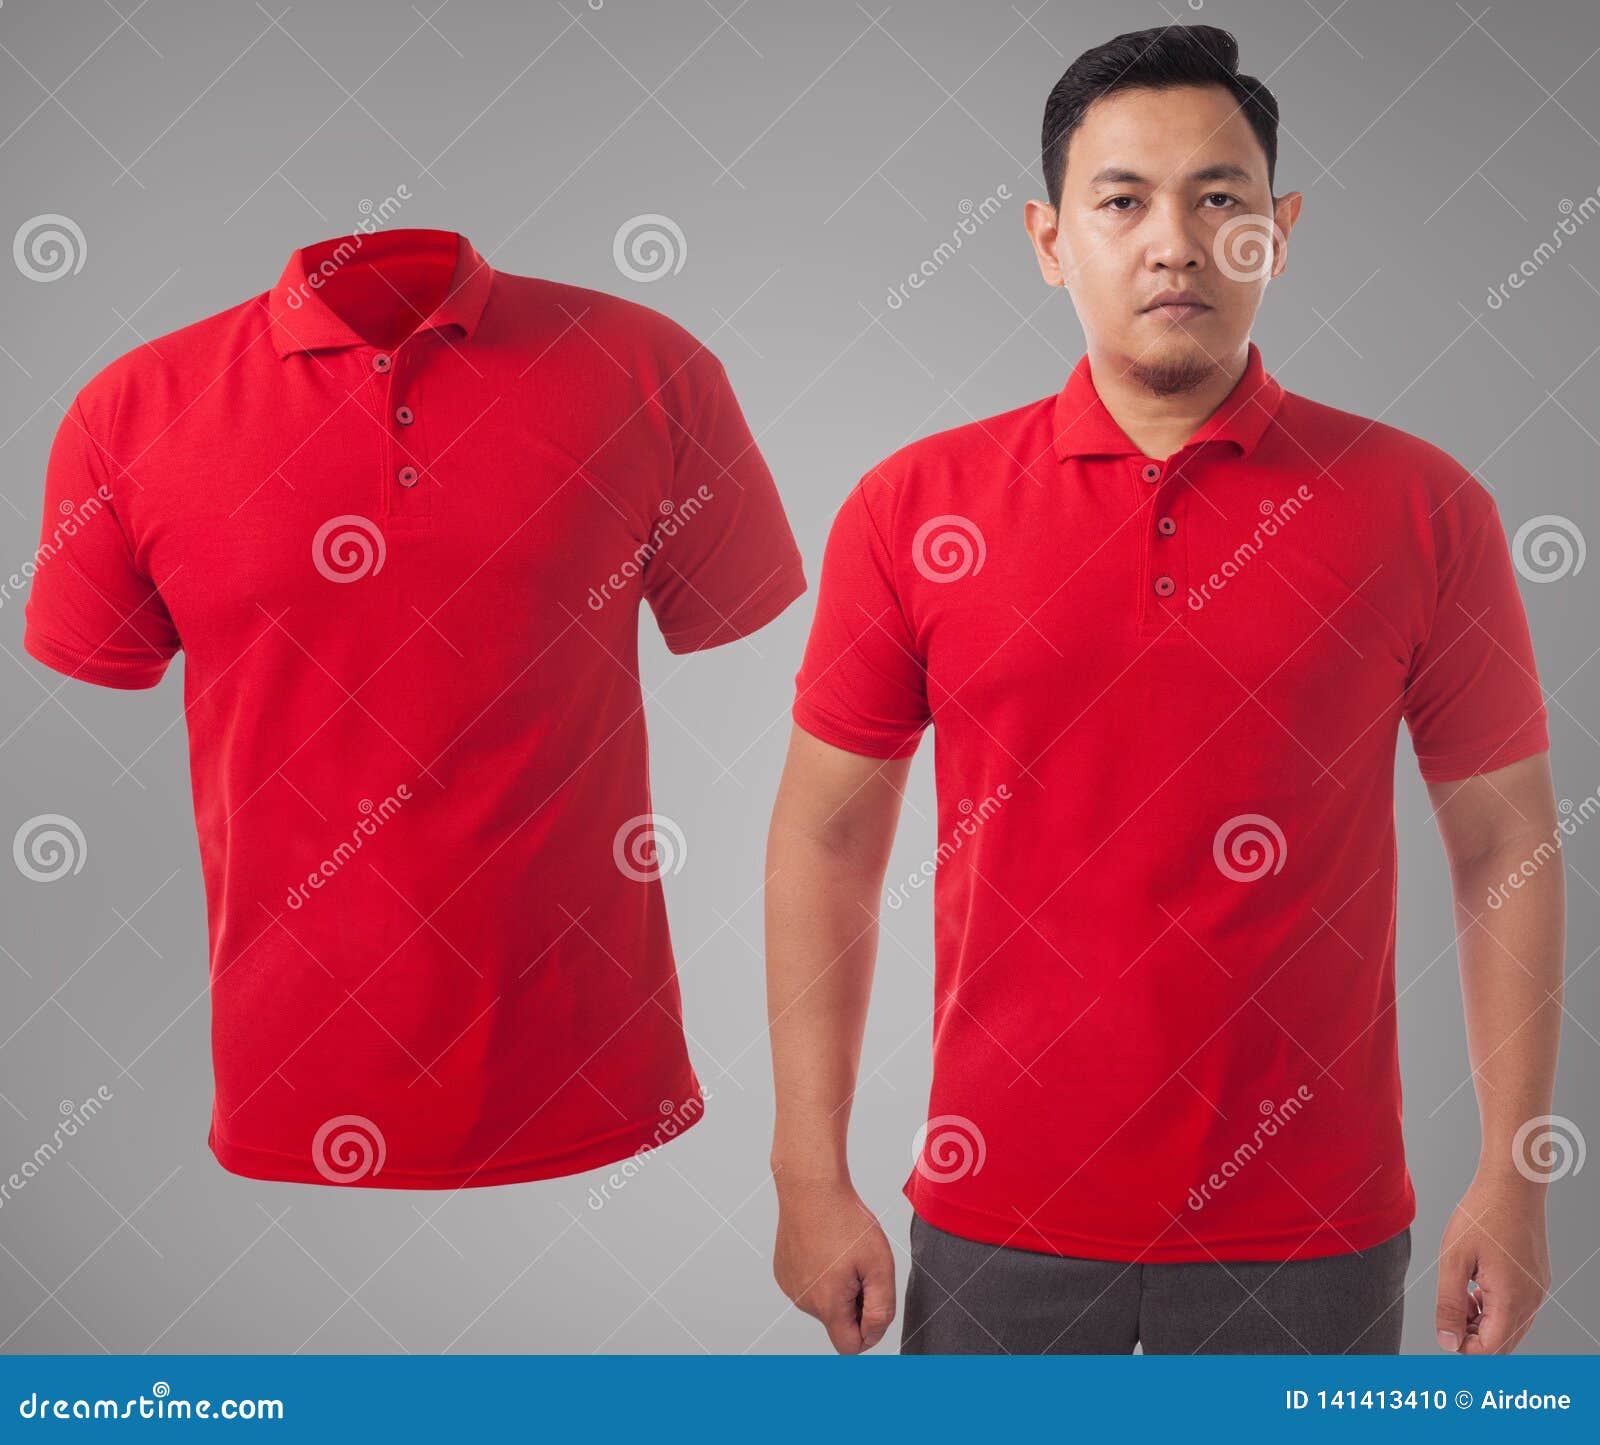 Download Red Collared Shirt Design Template Stock Photo - Image of ...